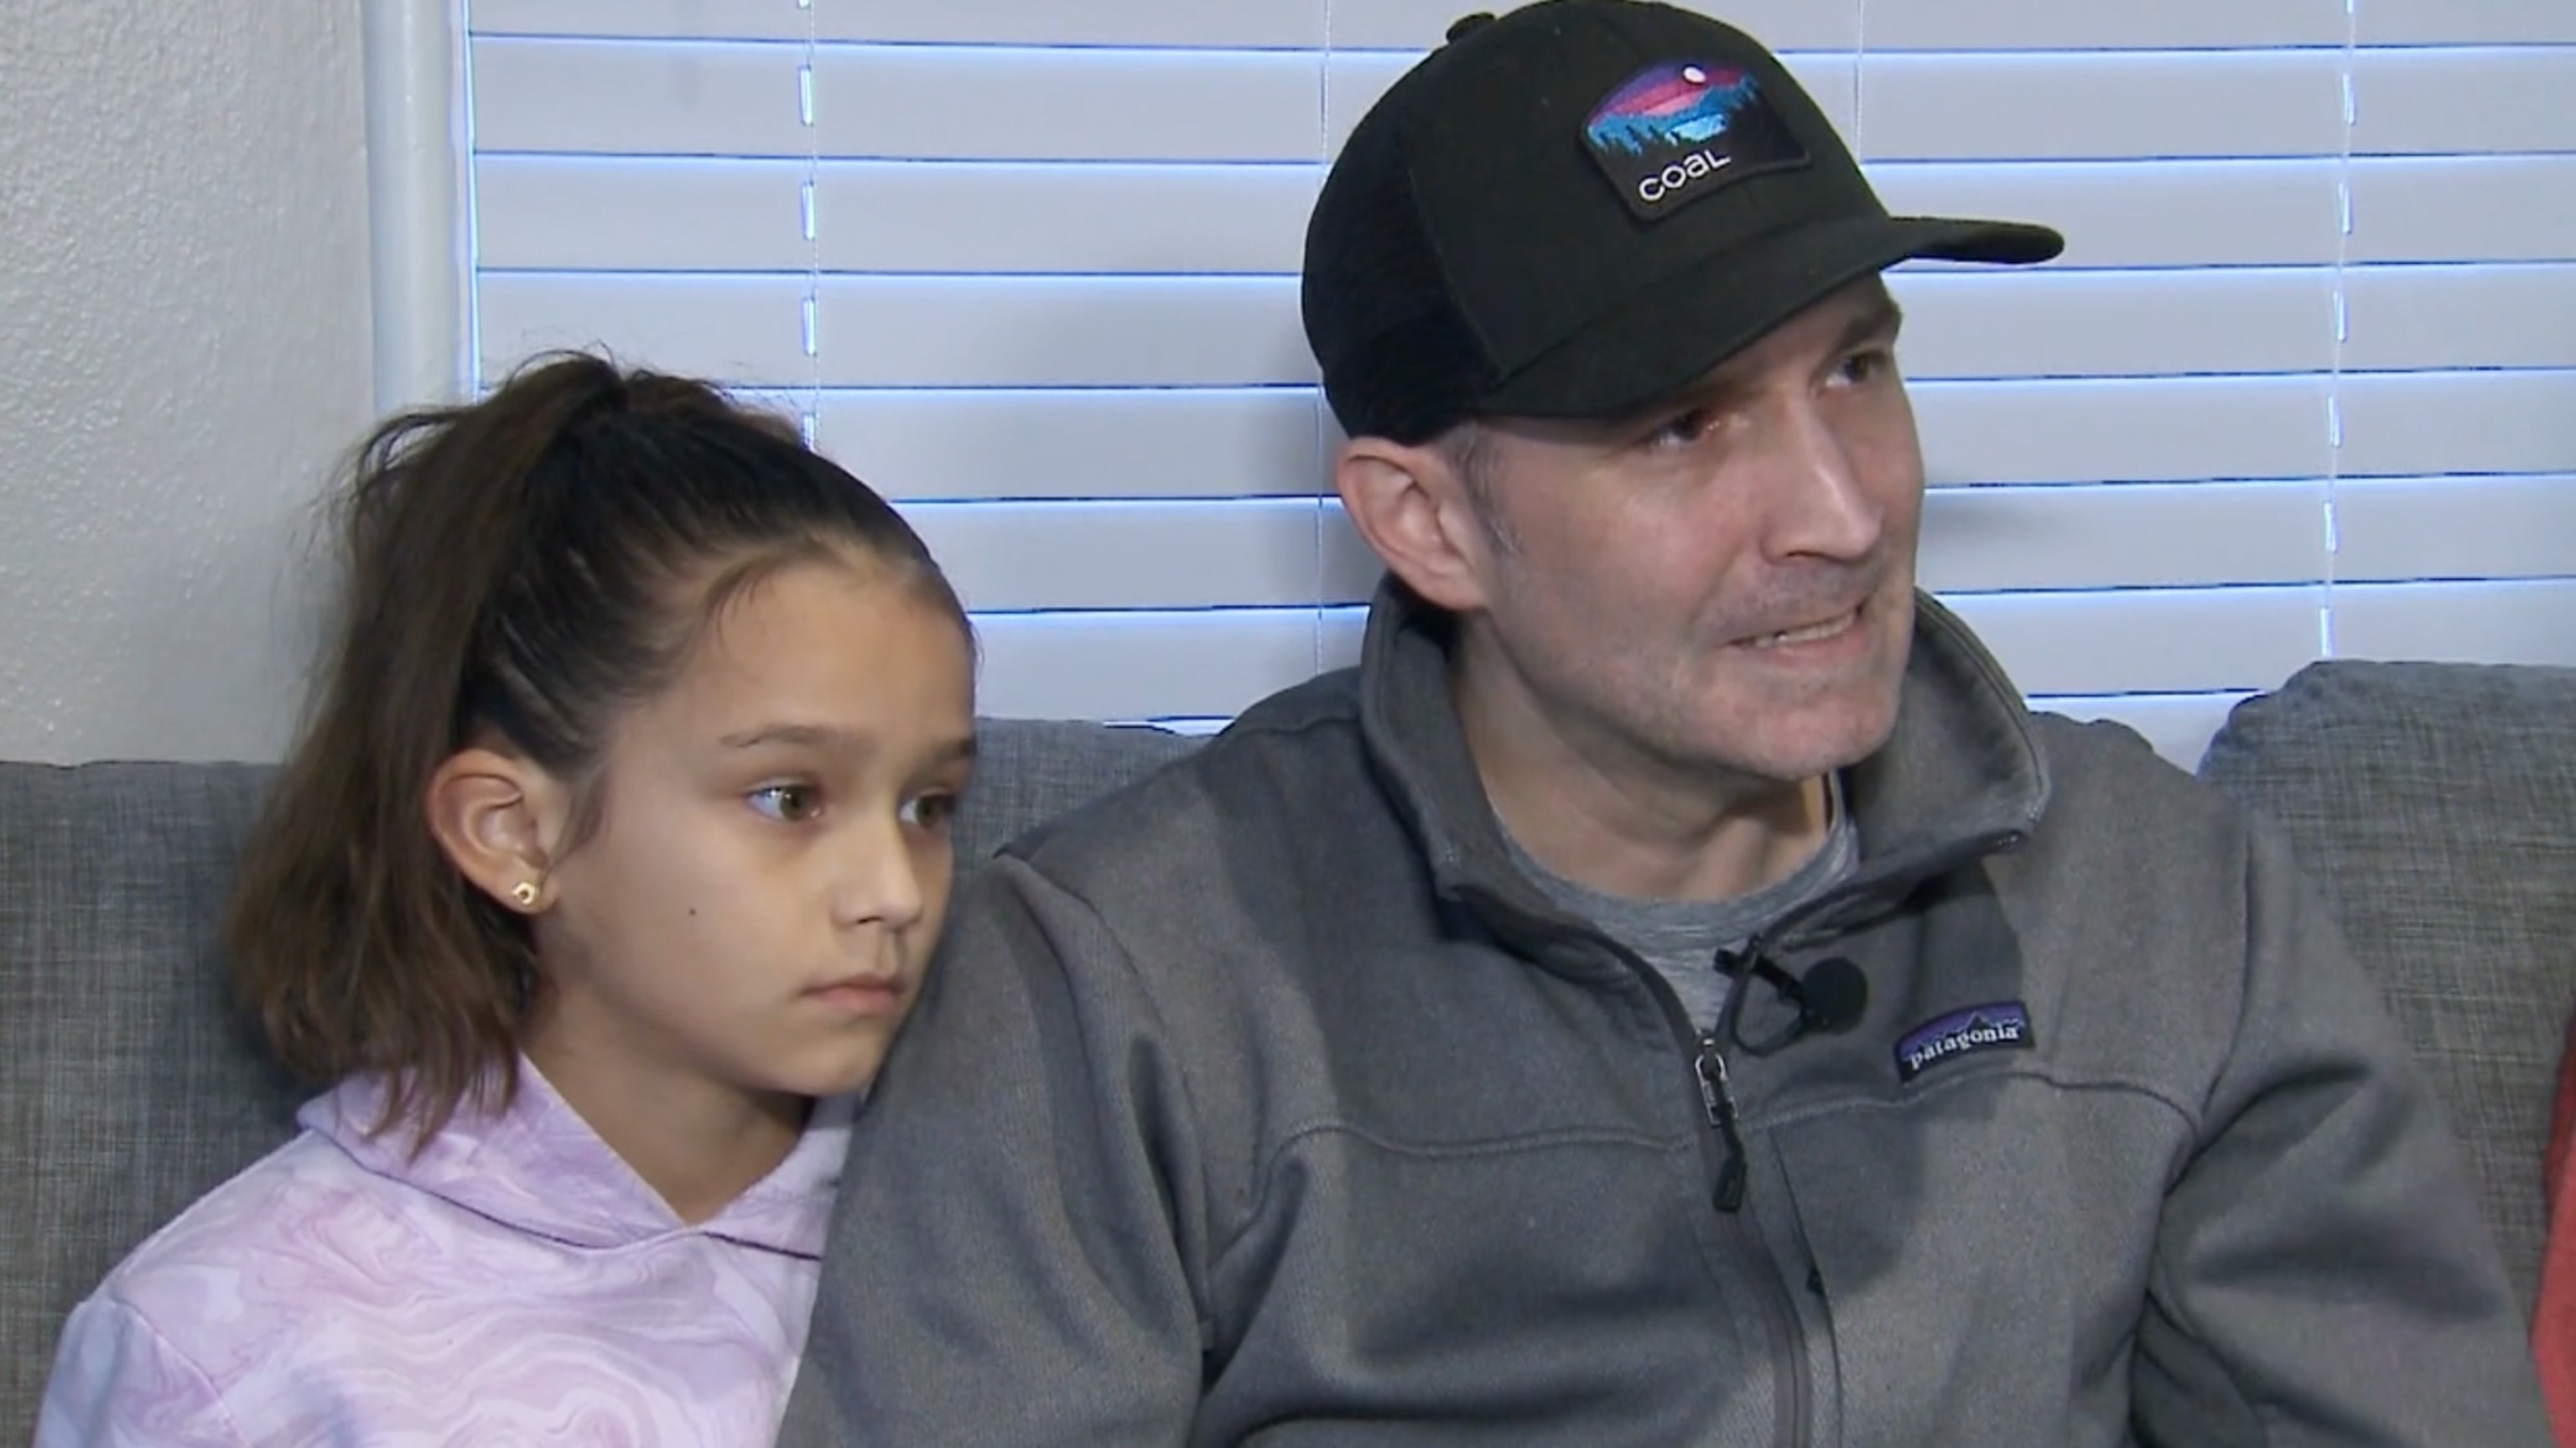 PHOTO: An 8-year-old Wisconsin girl’s quick thinking led to a safe rescue after a car theft in Oak Creek Wisconsin.